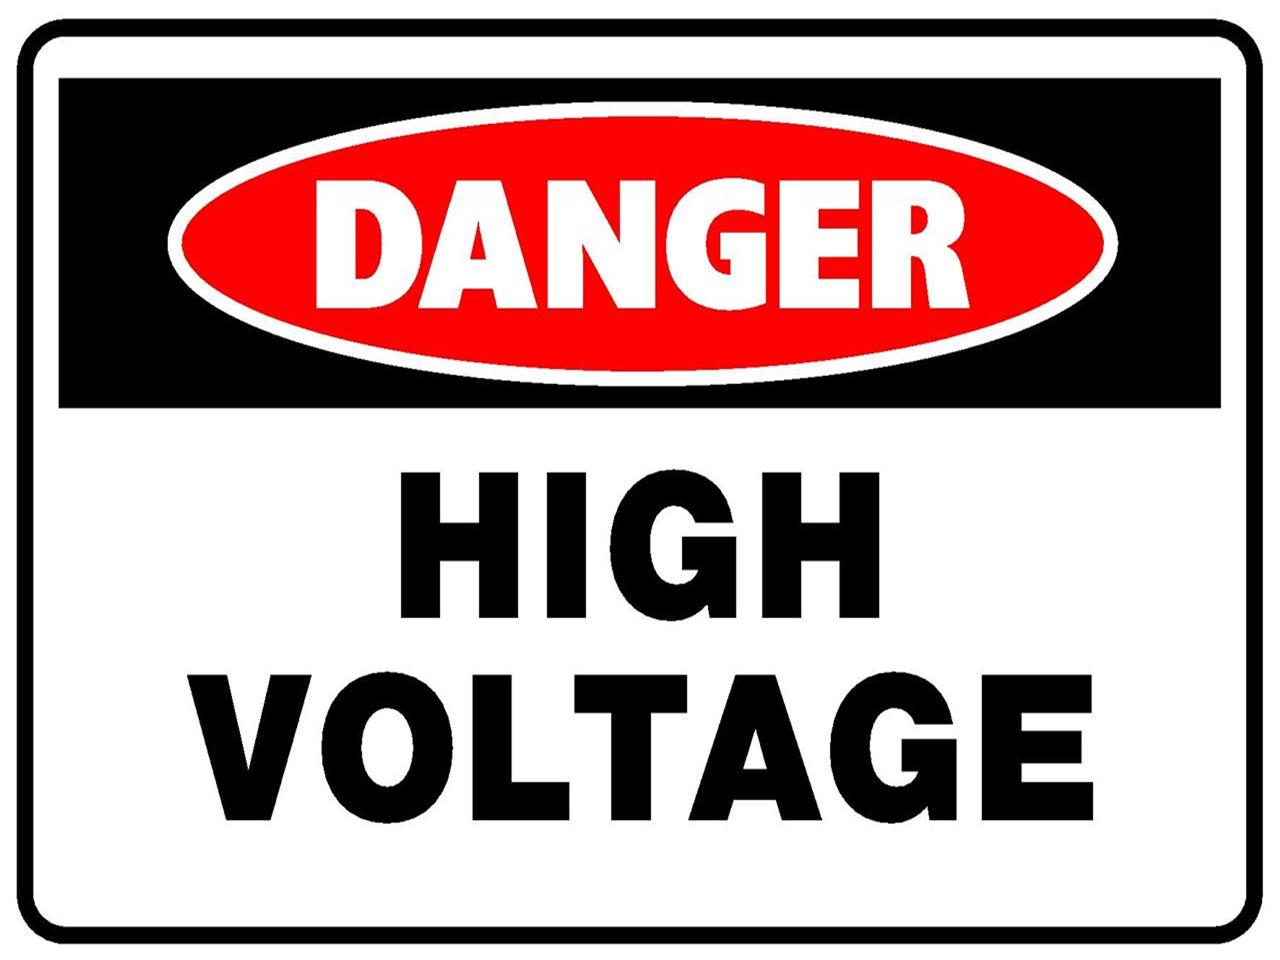 High Voltage Warning Signs - ClipArt Best